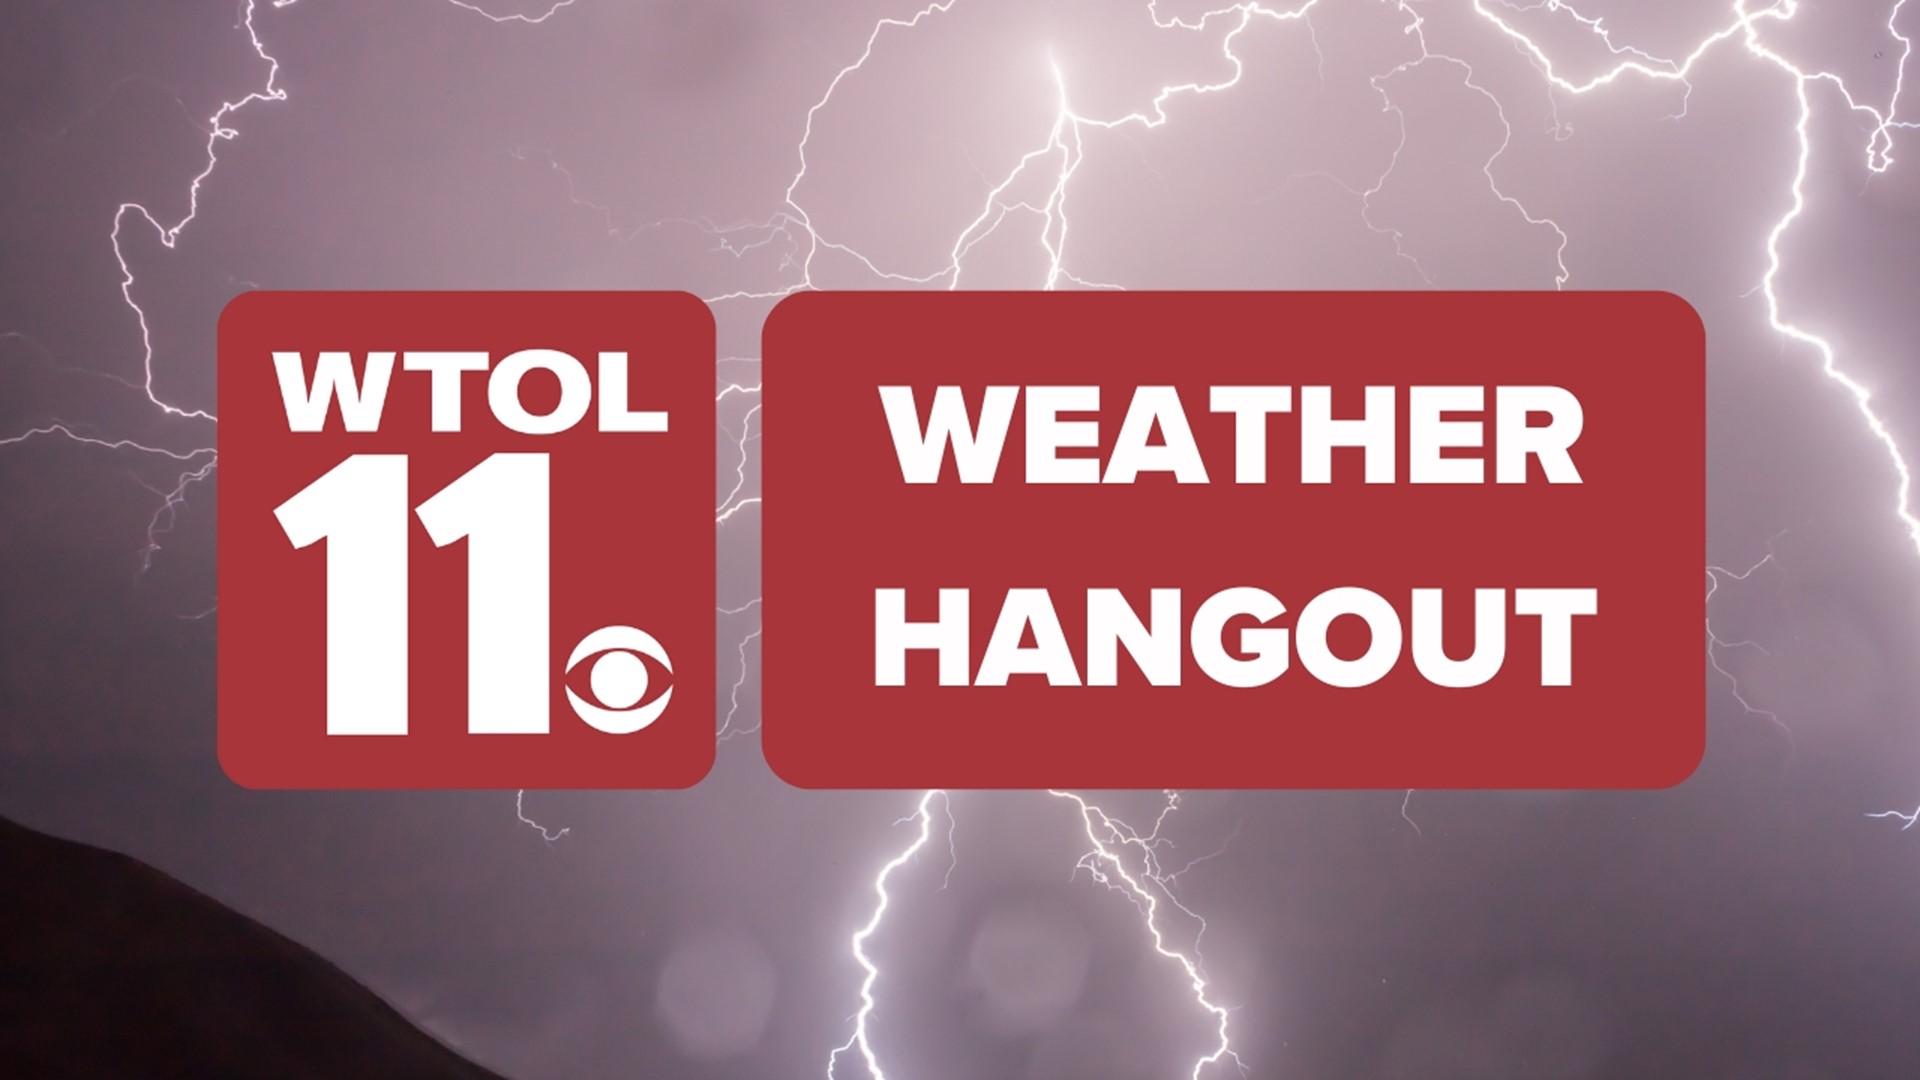 Find out what the WTOL 11 Weather team is talking about this week!